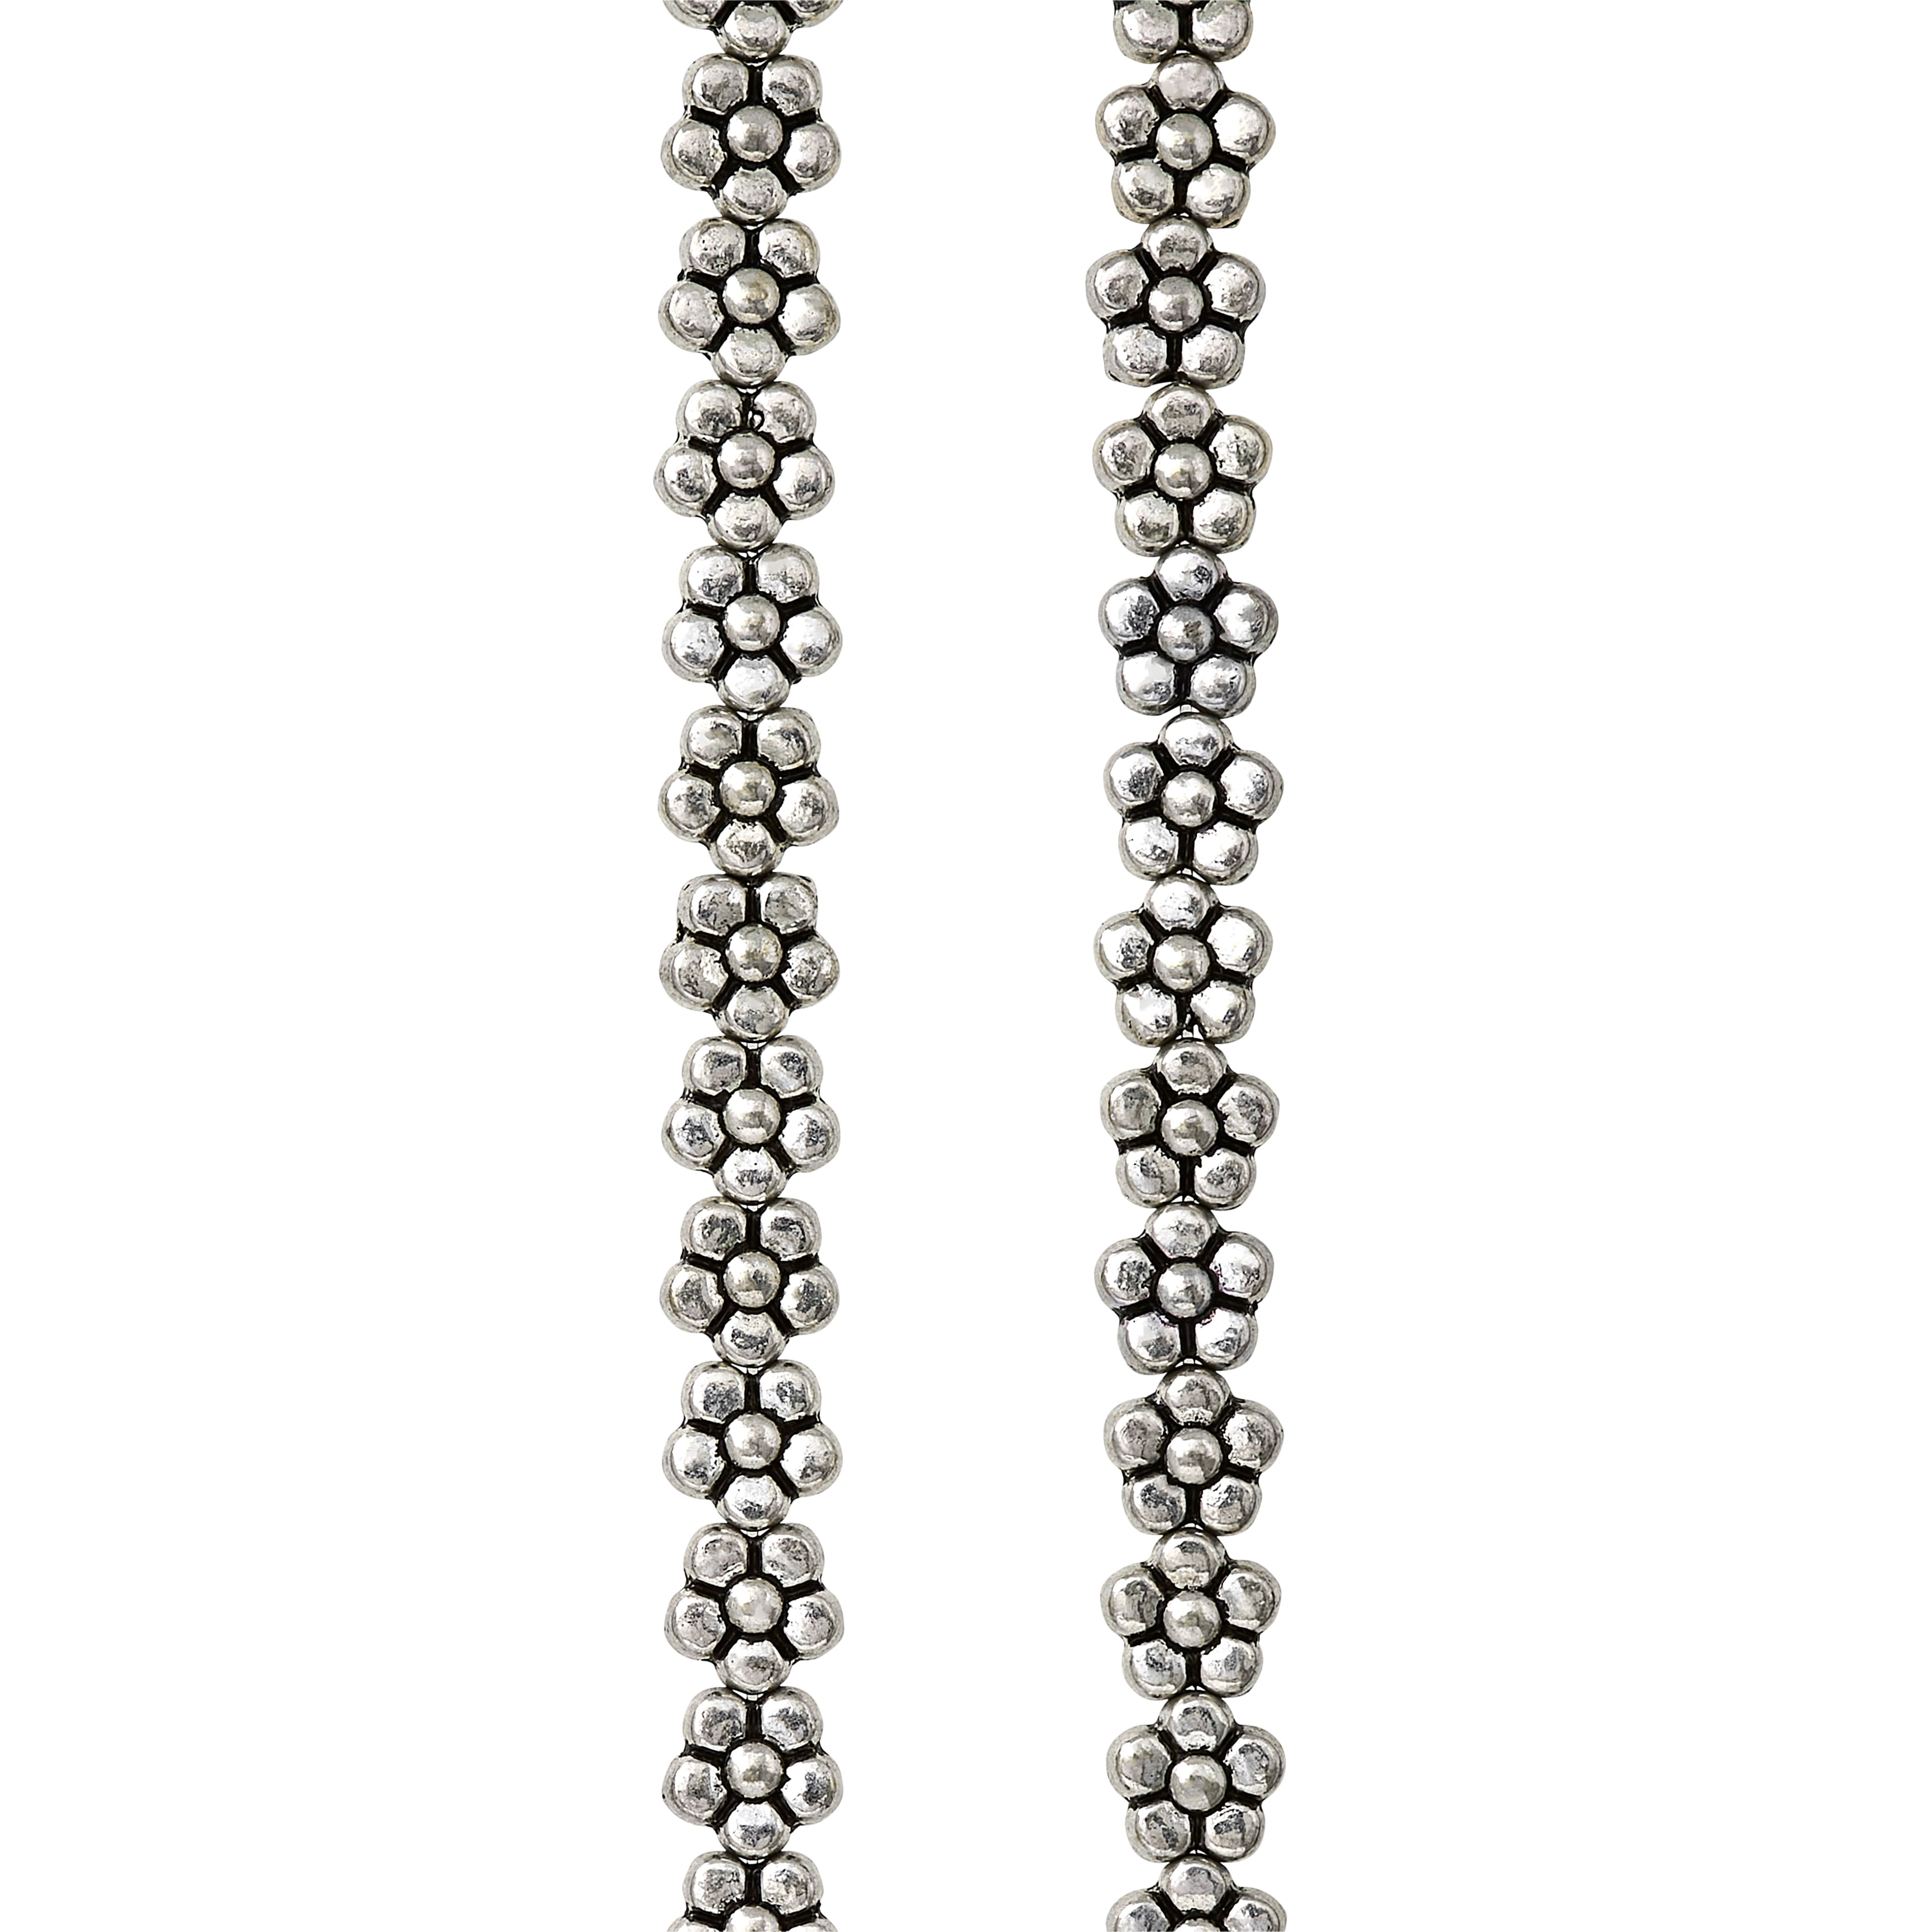 12 Pack: Silver Plated Flower Beads, 7mm by Bead Landing&#x2122;